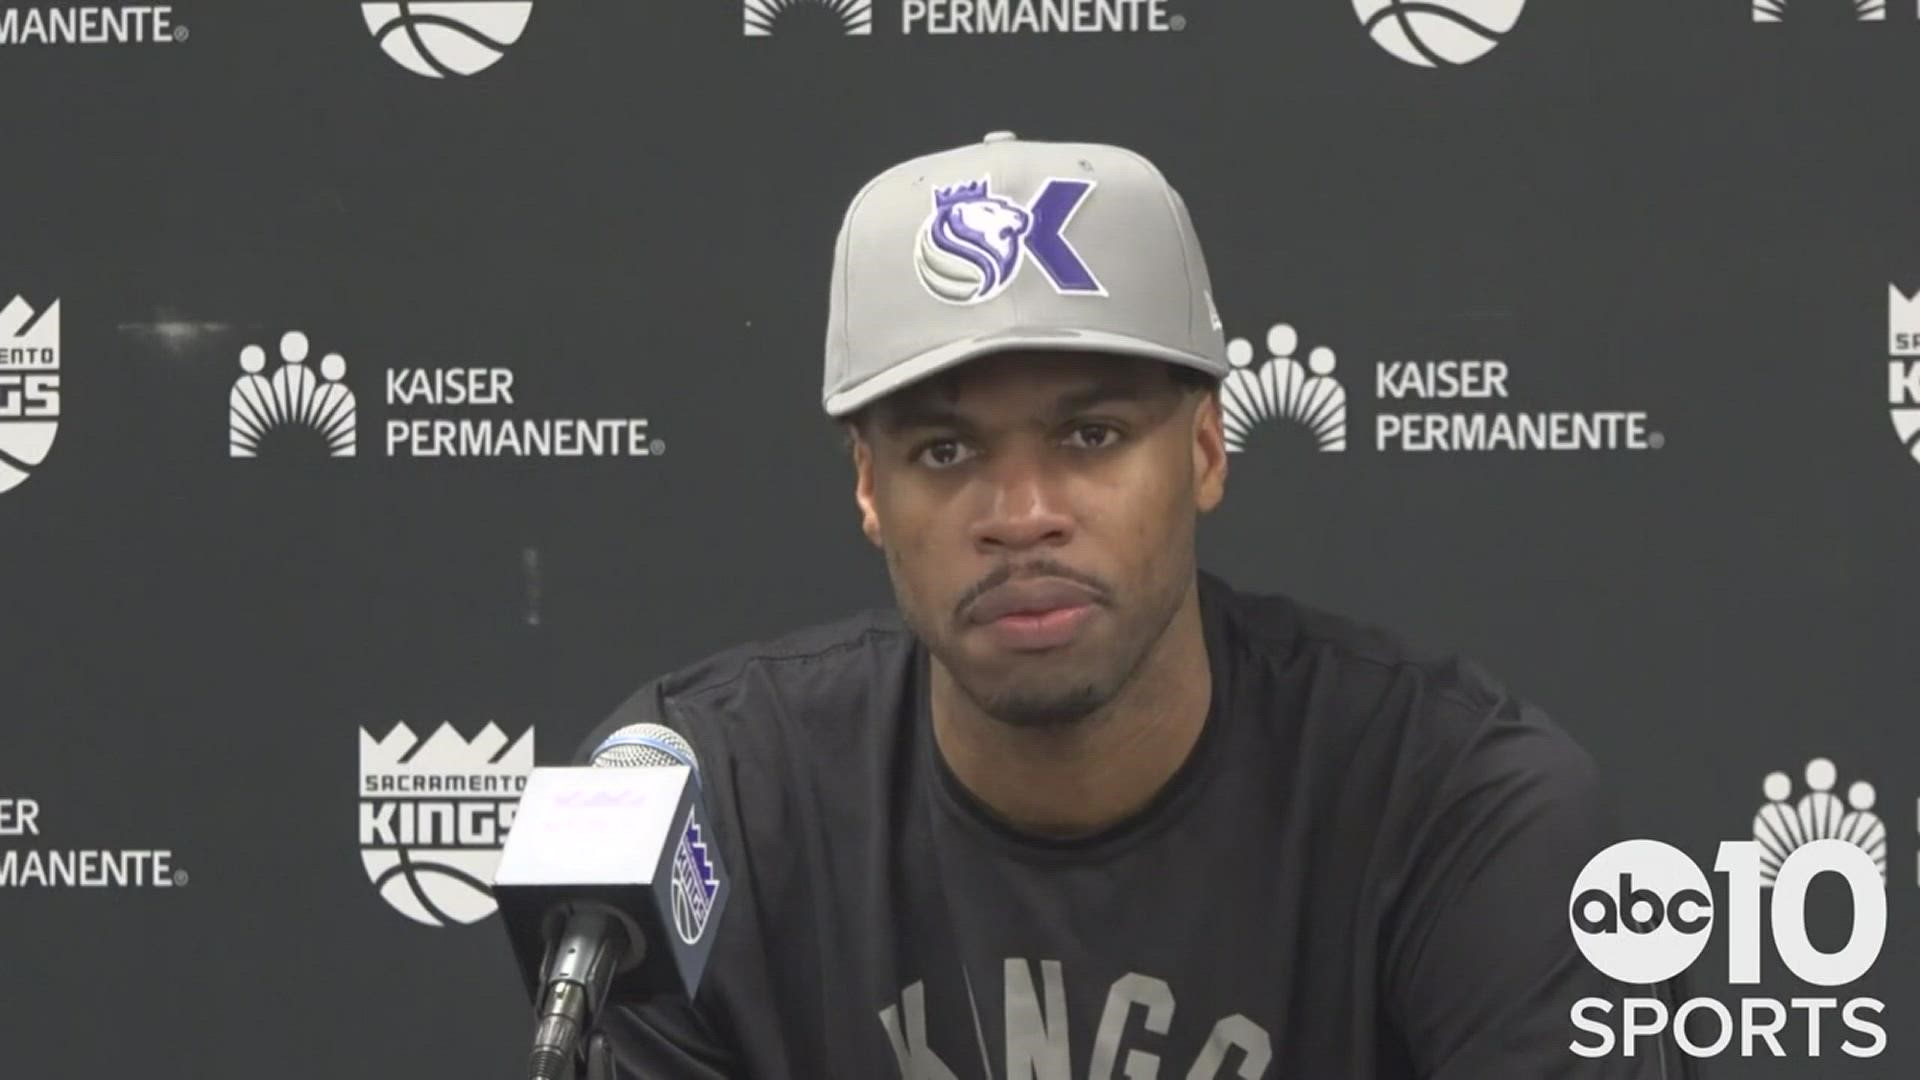 Kings guard Buddy Hield, fresh off his 27 point performance, talks about Sunday's 118-112 loss to the Rockets and splitting the two game series with Houston.